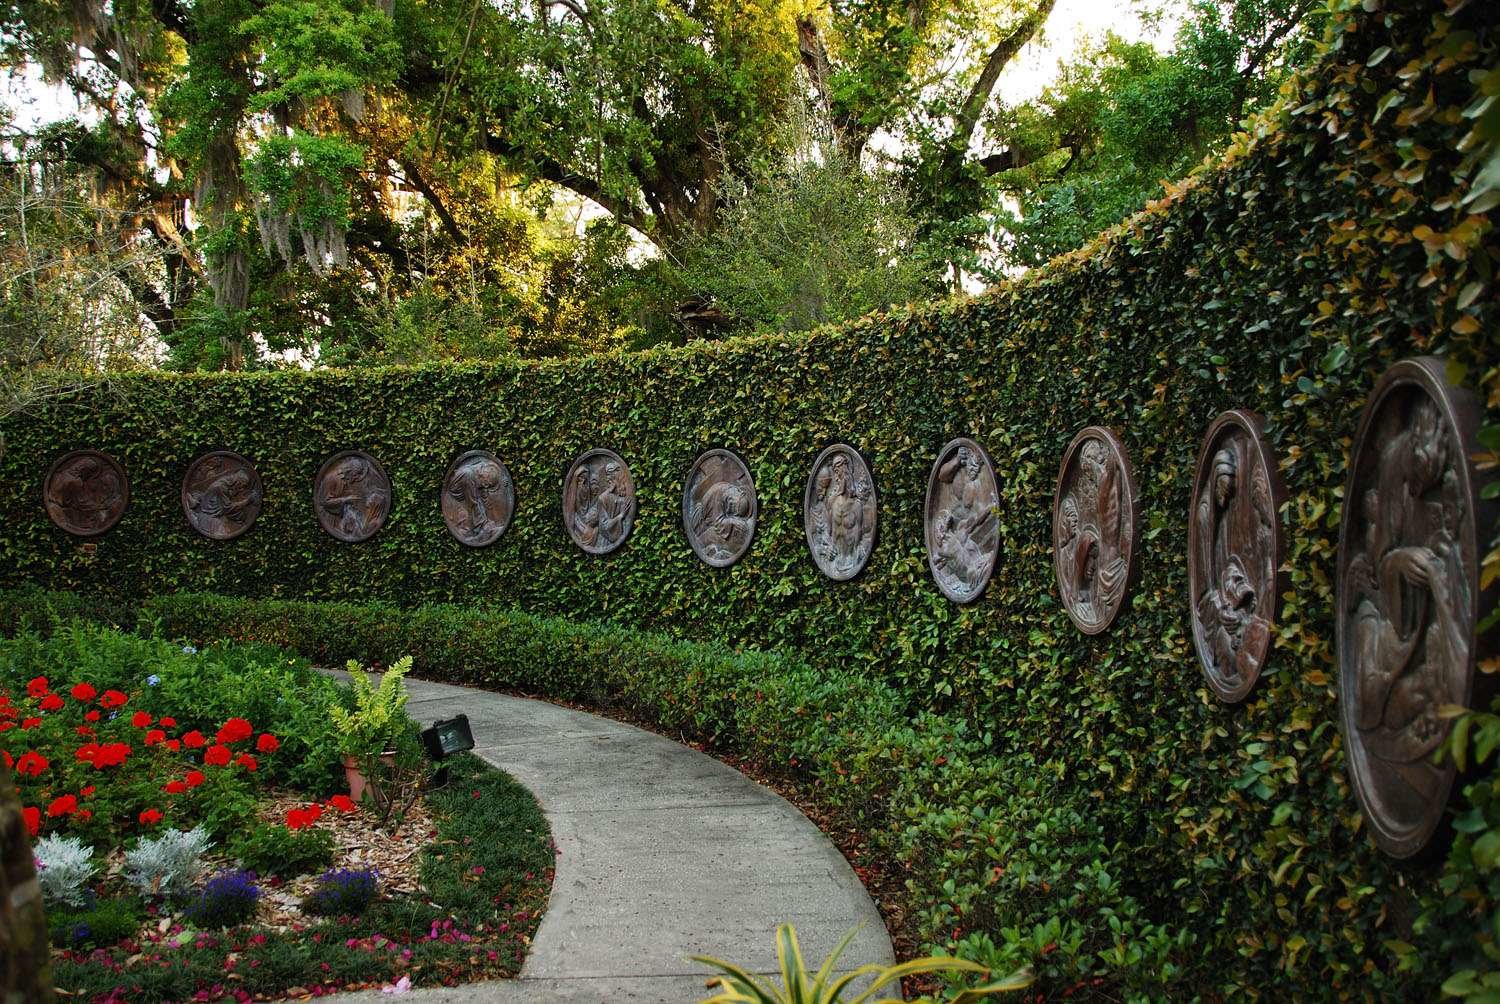 curved bush with metal oval sculptures in the greenery